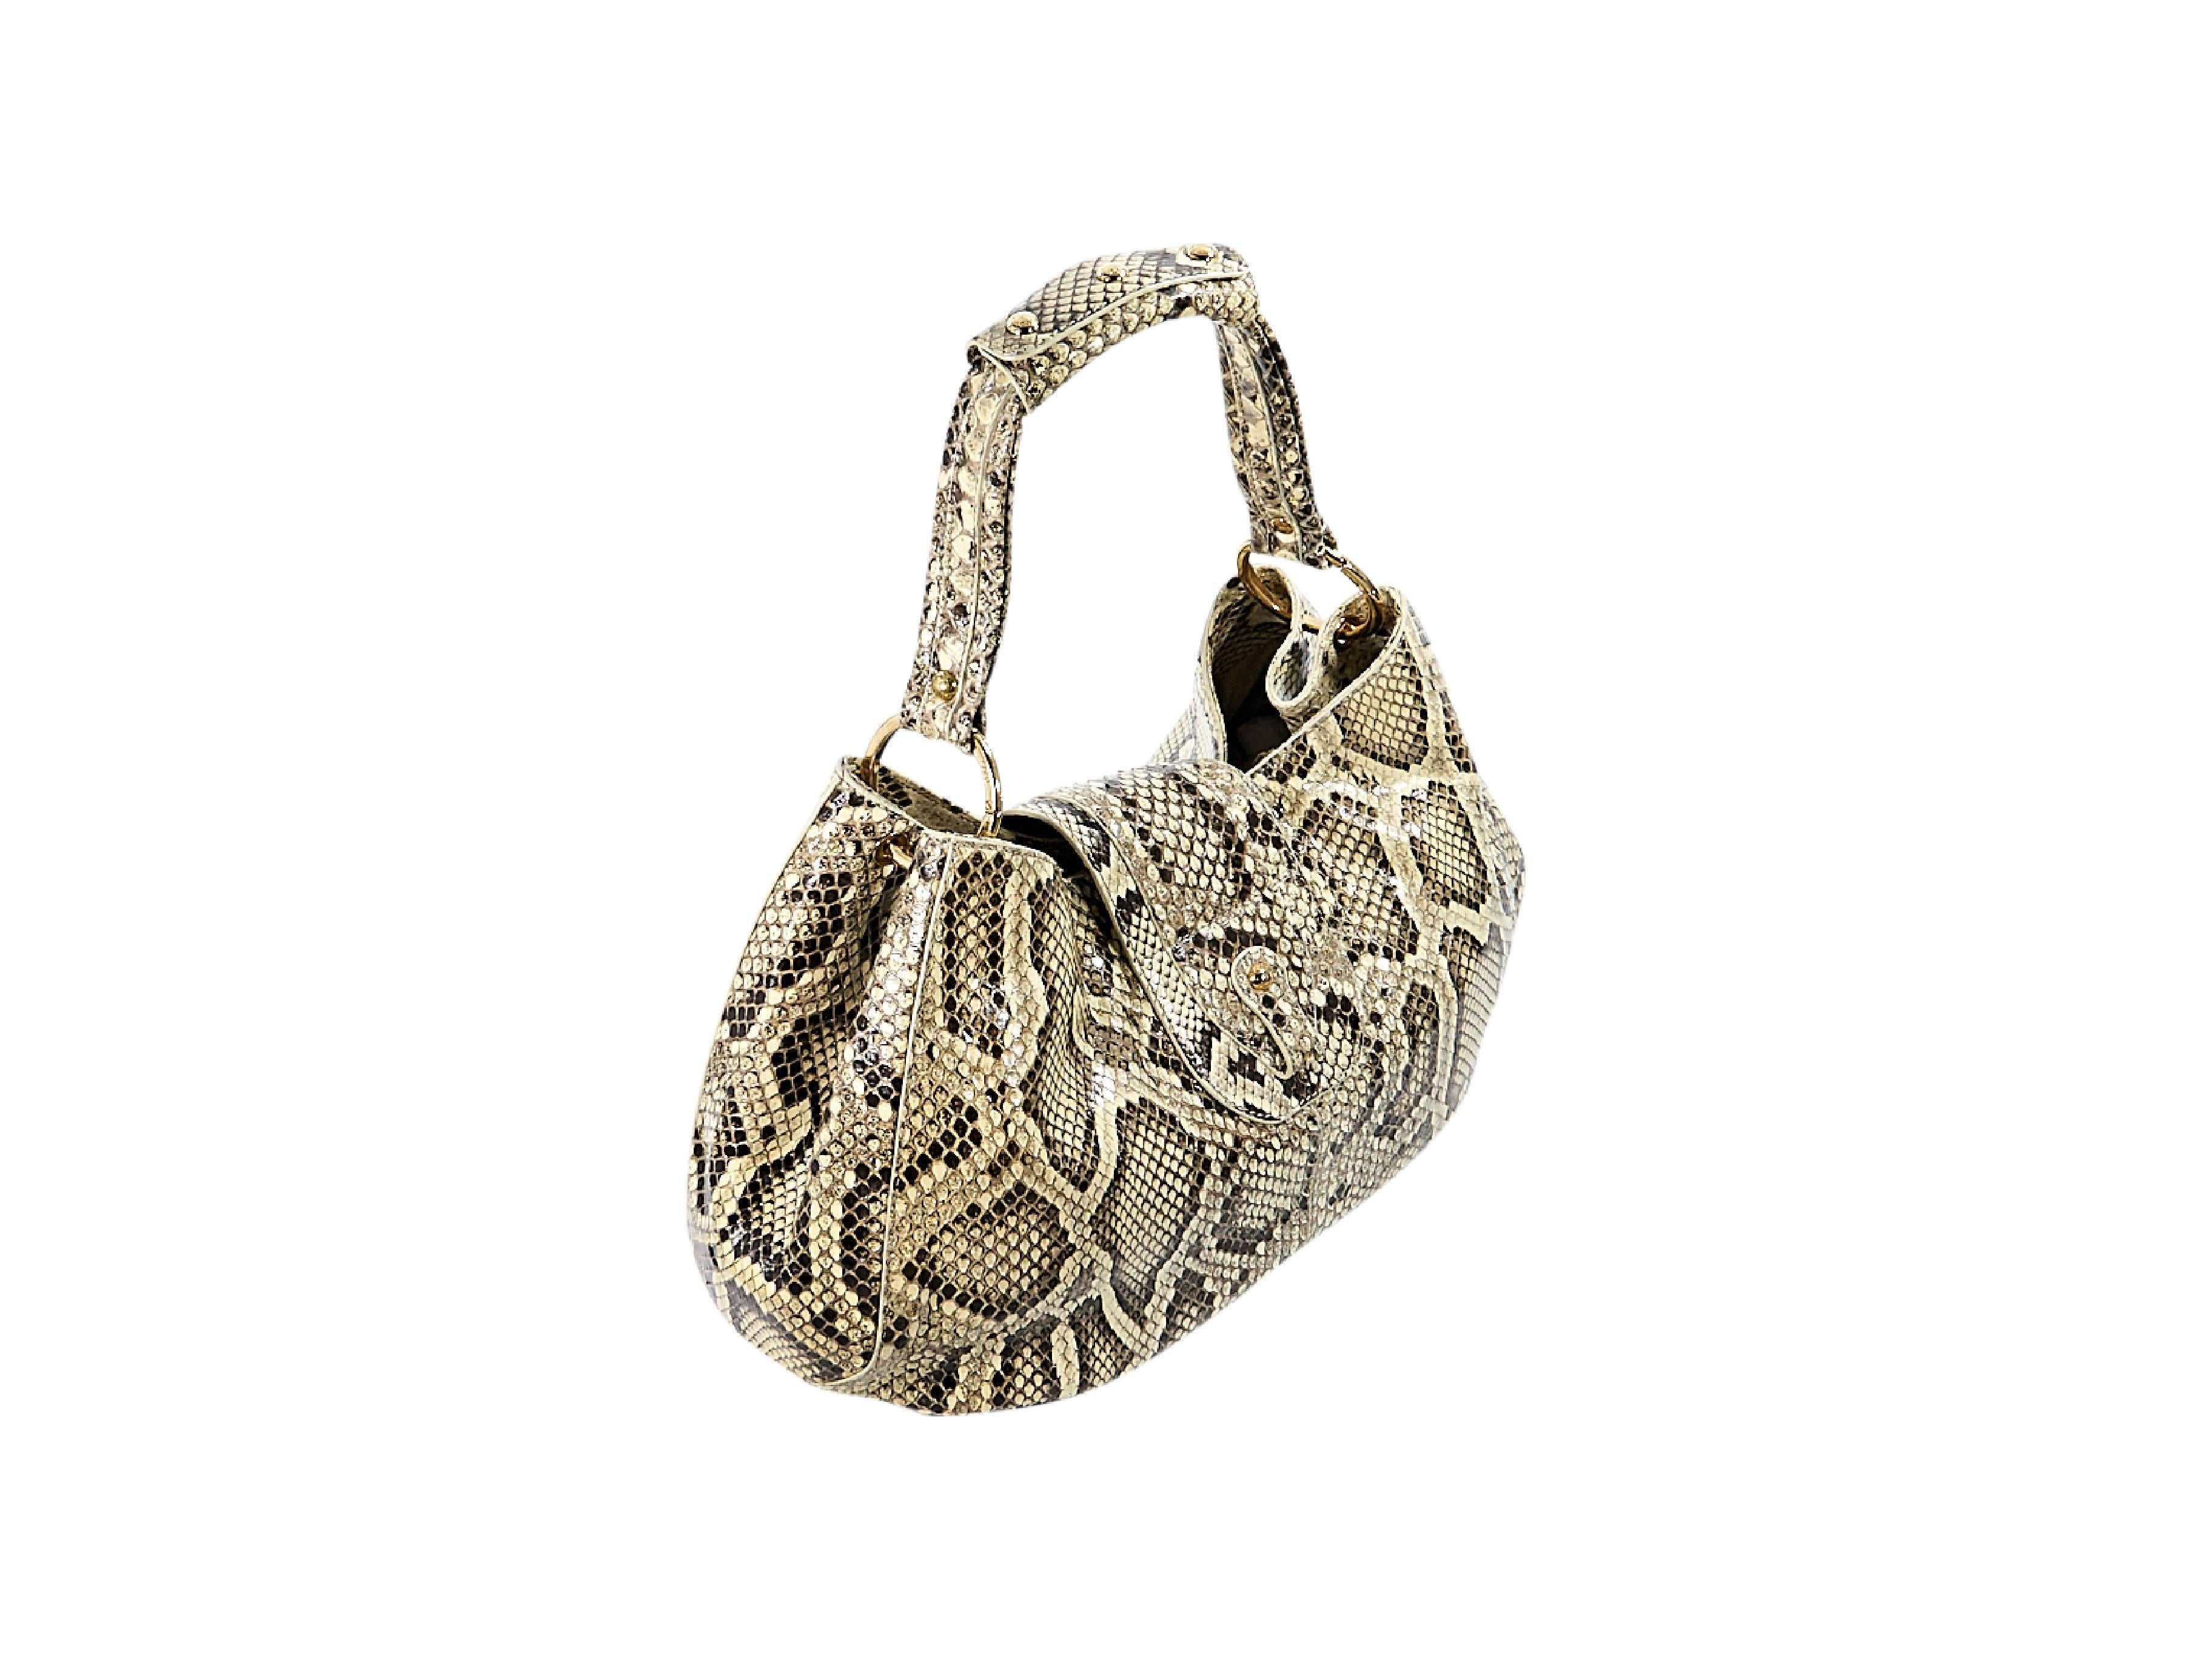 Product details:  Beige python hobo bag by Tod's.  Single shoulder strap.  Top strap with hook closure.  Lined interior with inner center zip compartment and slide and zip pockets.  Front flap pocket with magnetic snap closure.  Goldtone hardware. 